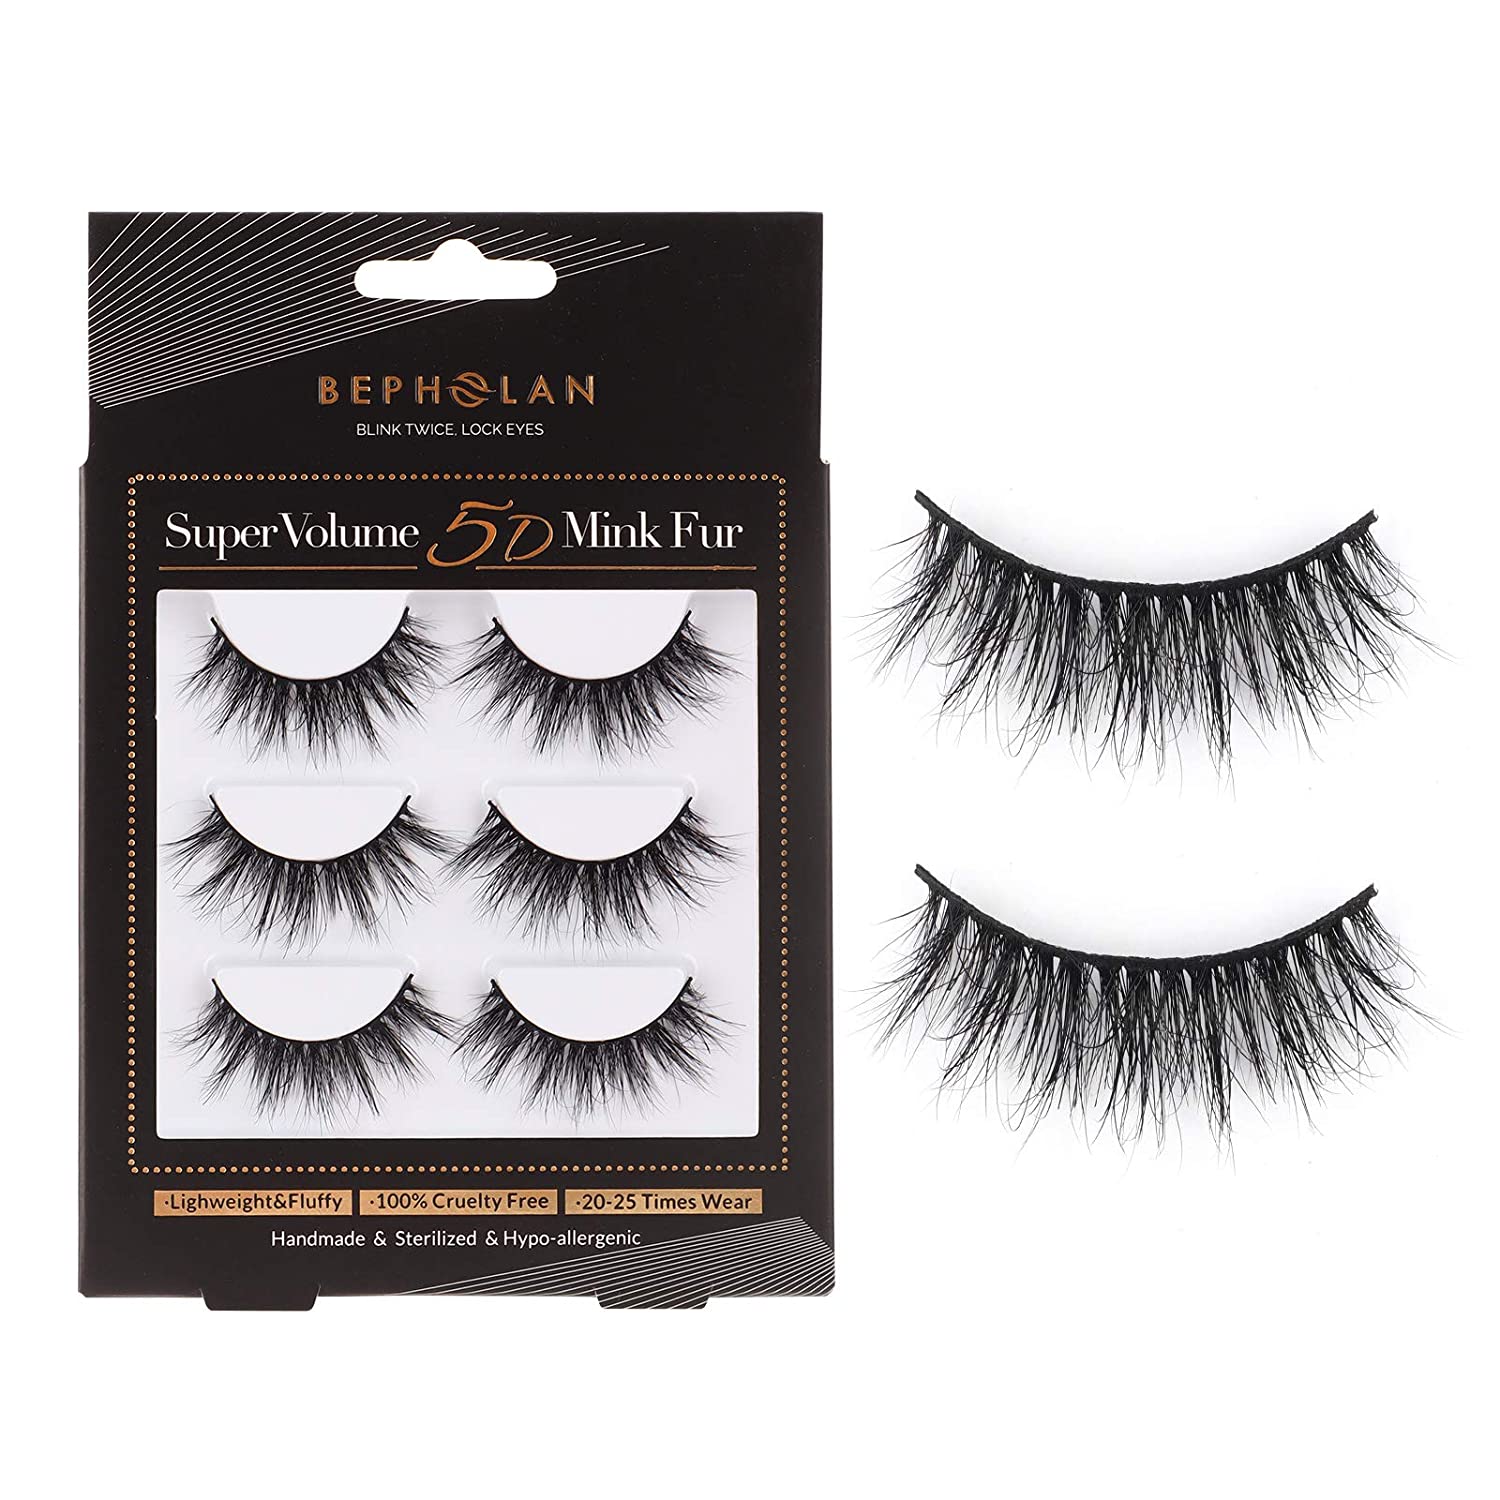  Ardell Multipack Demi Wispies False Lashes 5 Pairs x 1 pack